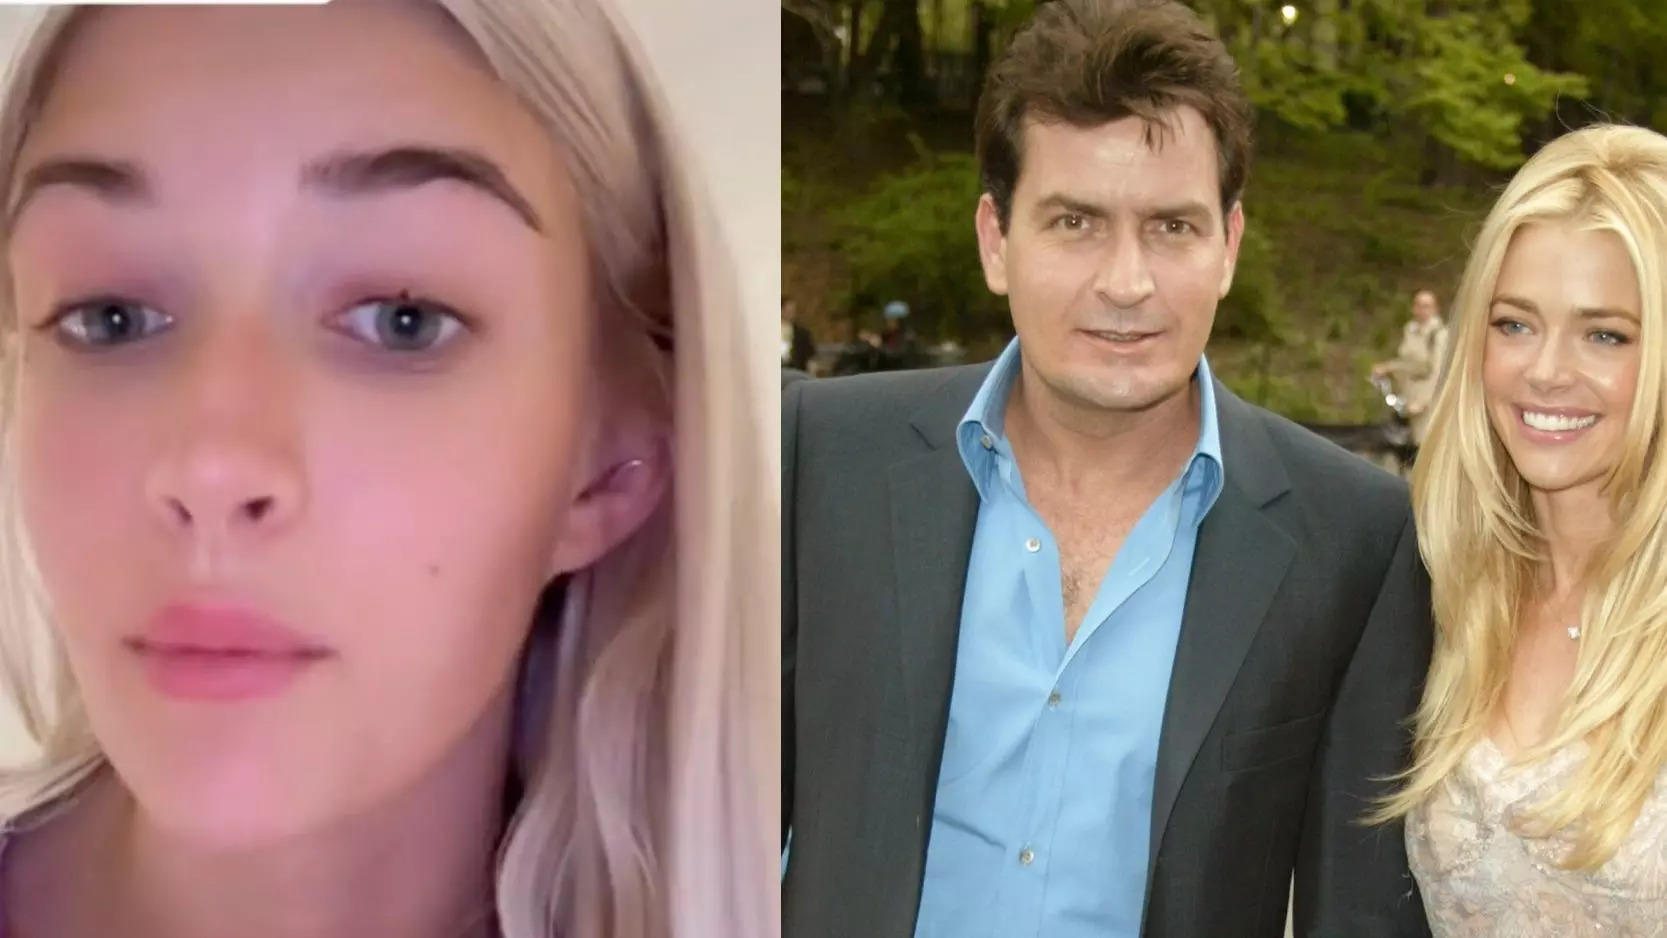 Charlie Sheen and Denise Richards daughter clarifies that shes not a porn star in a TikTok video I dont film myself having sex Business Insider India